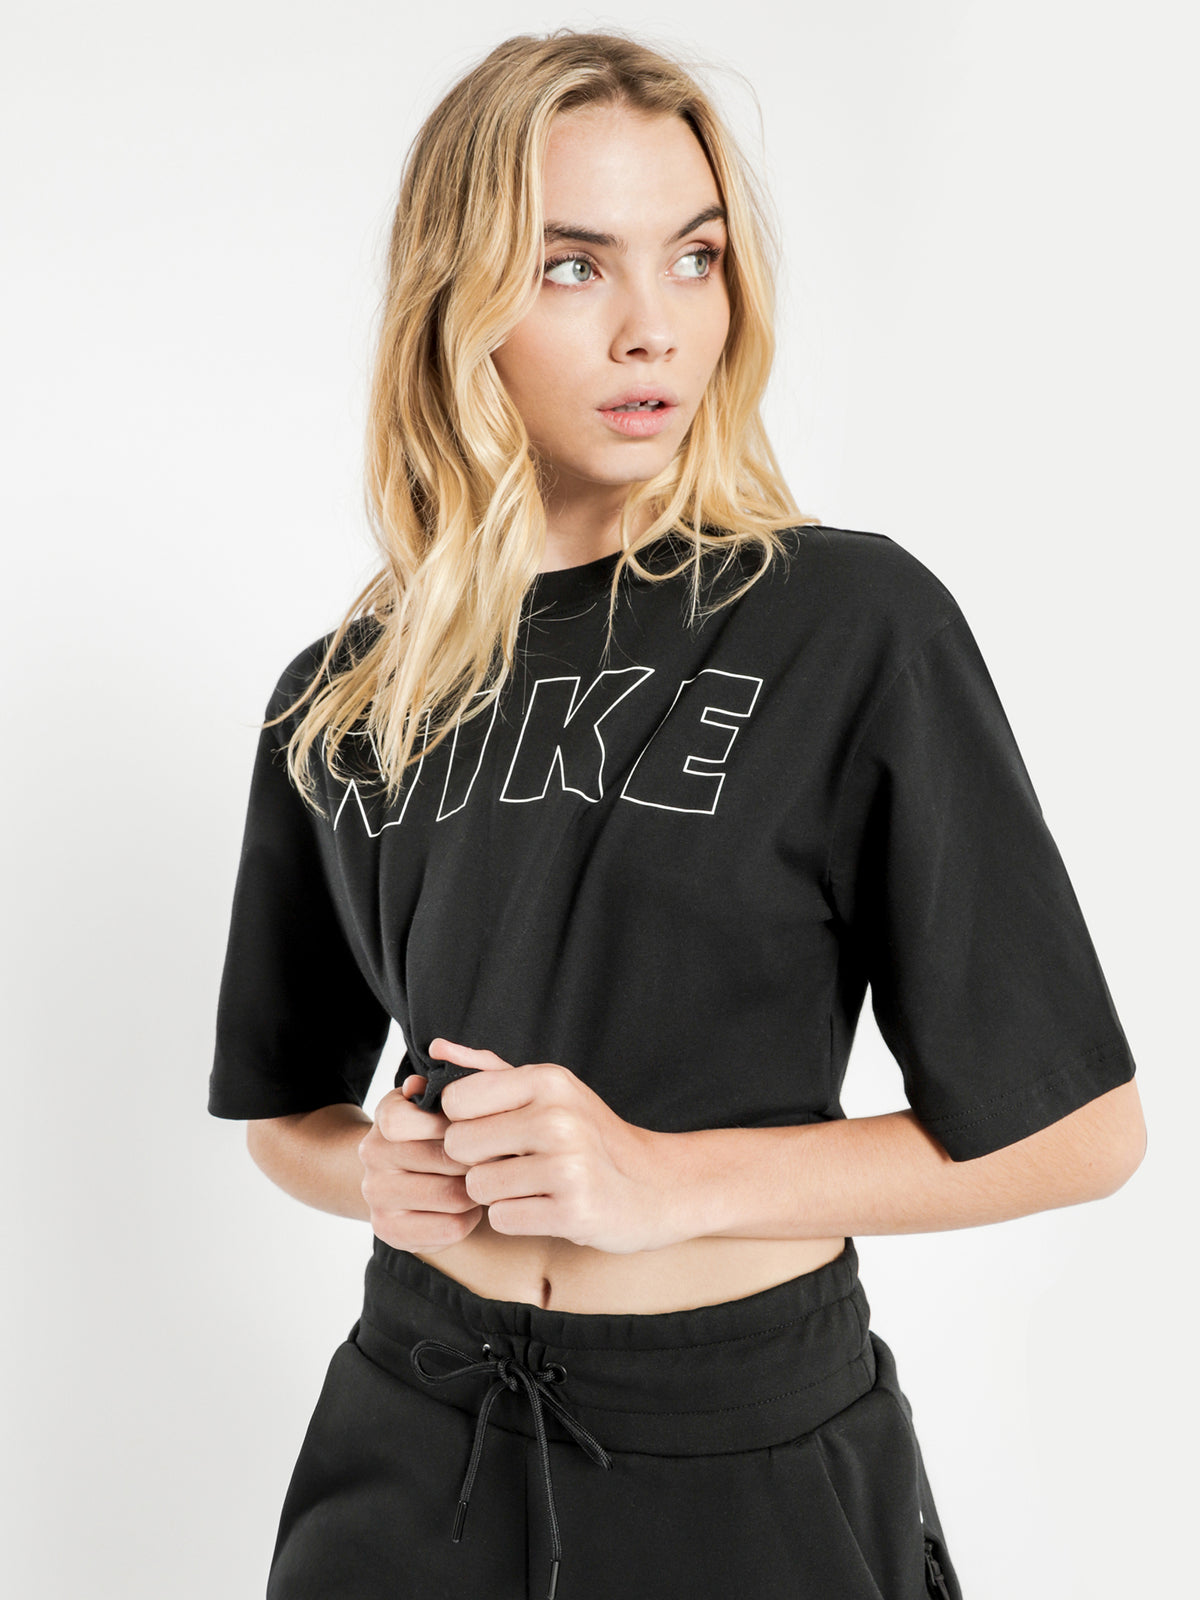 NSW Air Top in Black